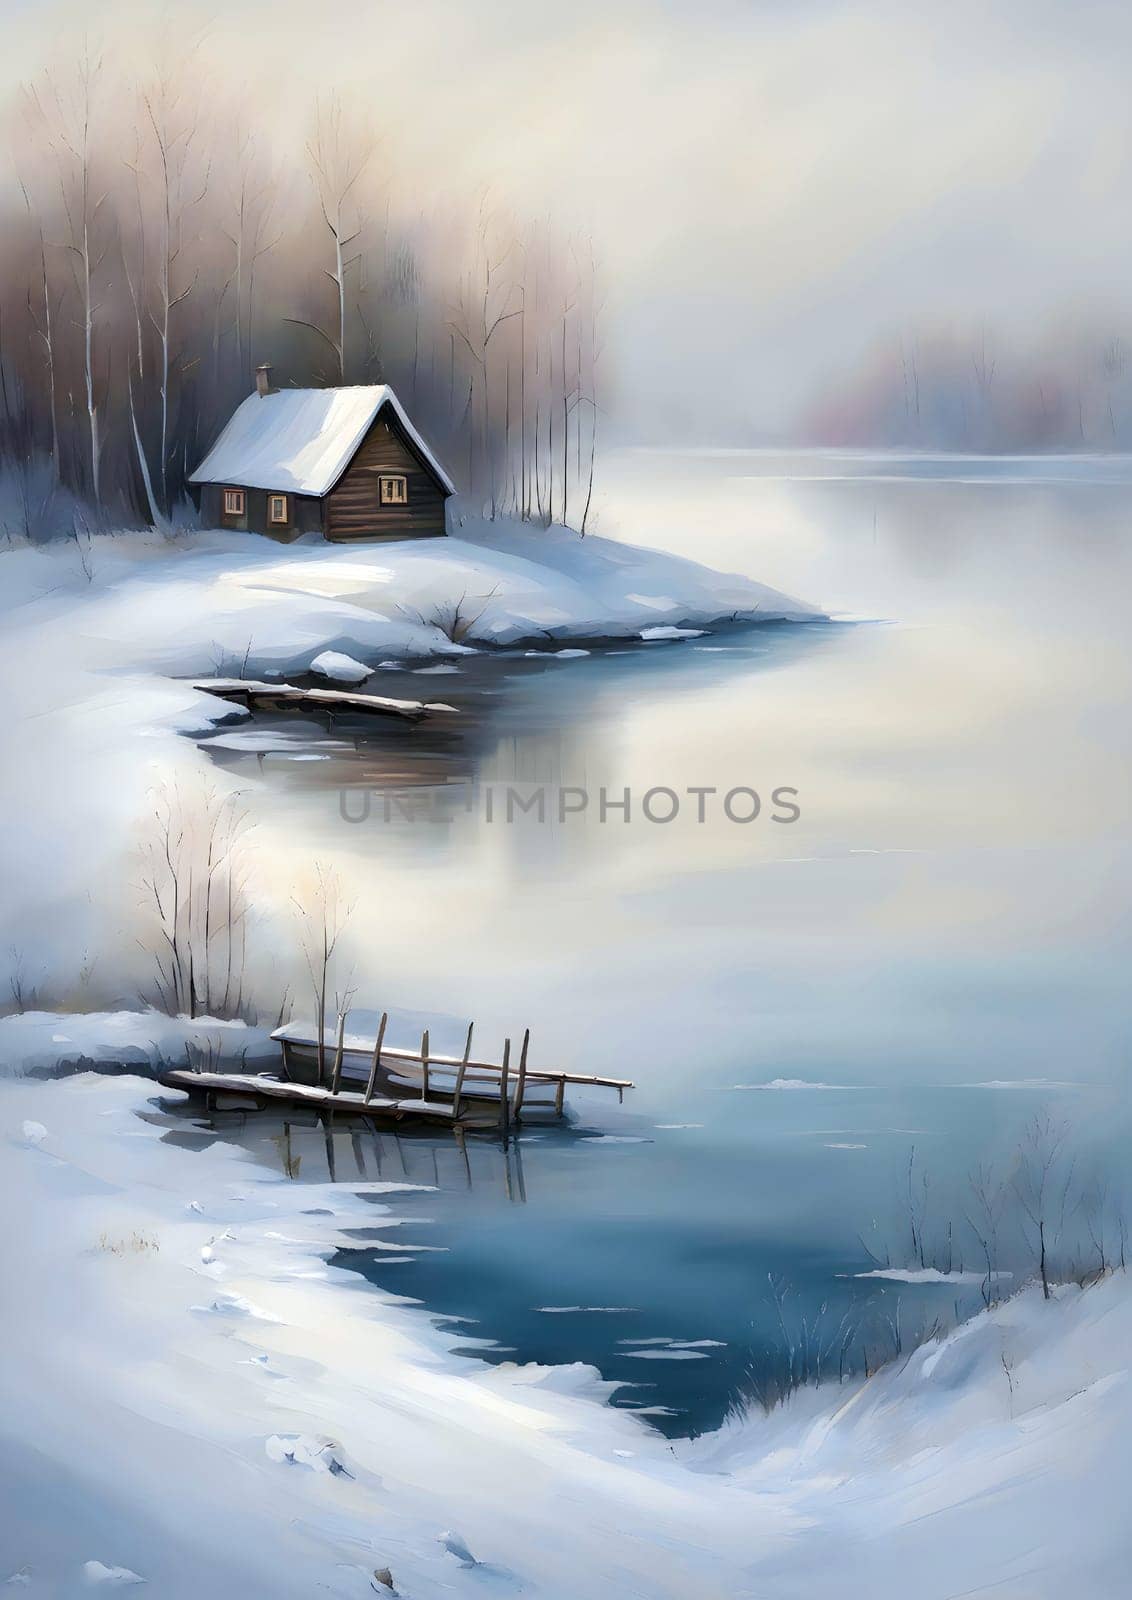 The picture shows a painting of a winter landscape with a cottage on the shore of a lake. The cottage is small, wooden and surrounded by trees. The lake is frozen and the sky is blue. Generate AI